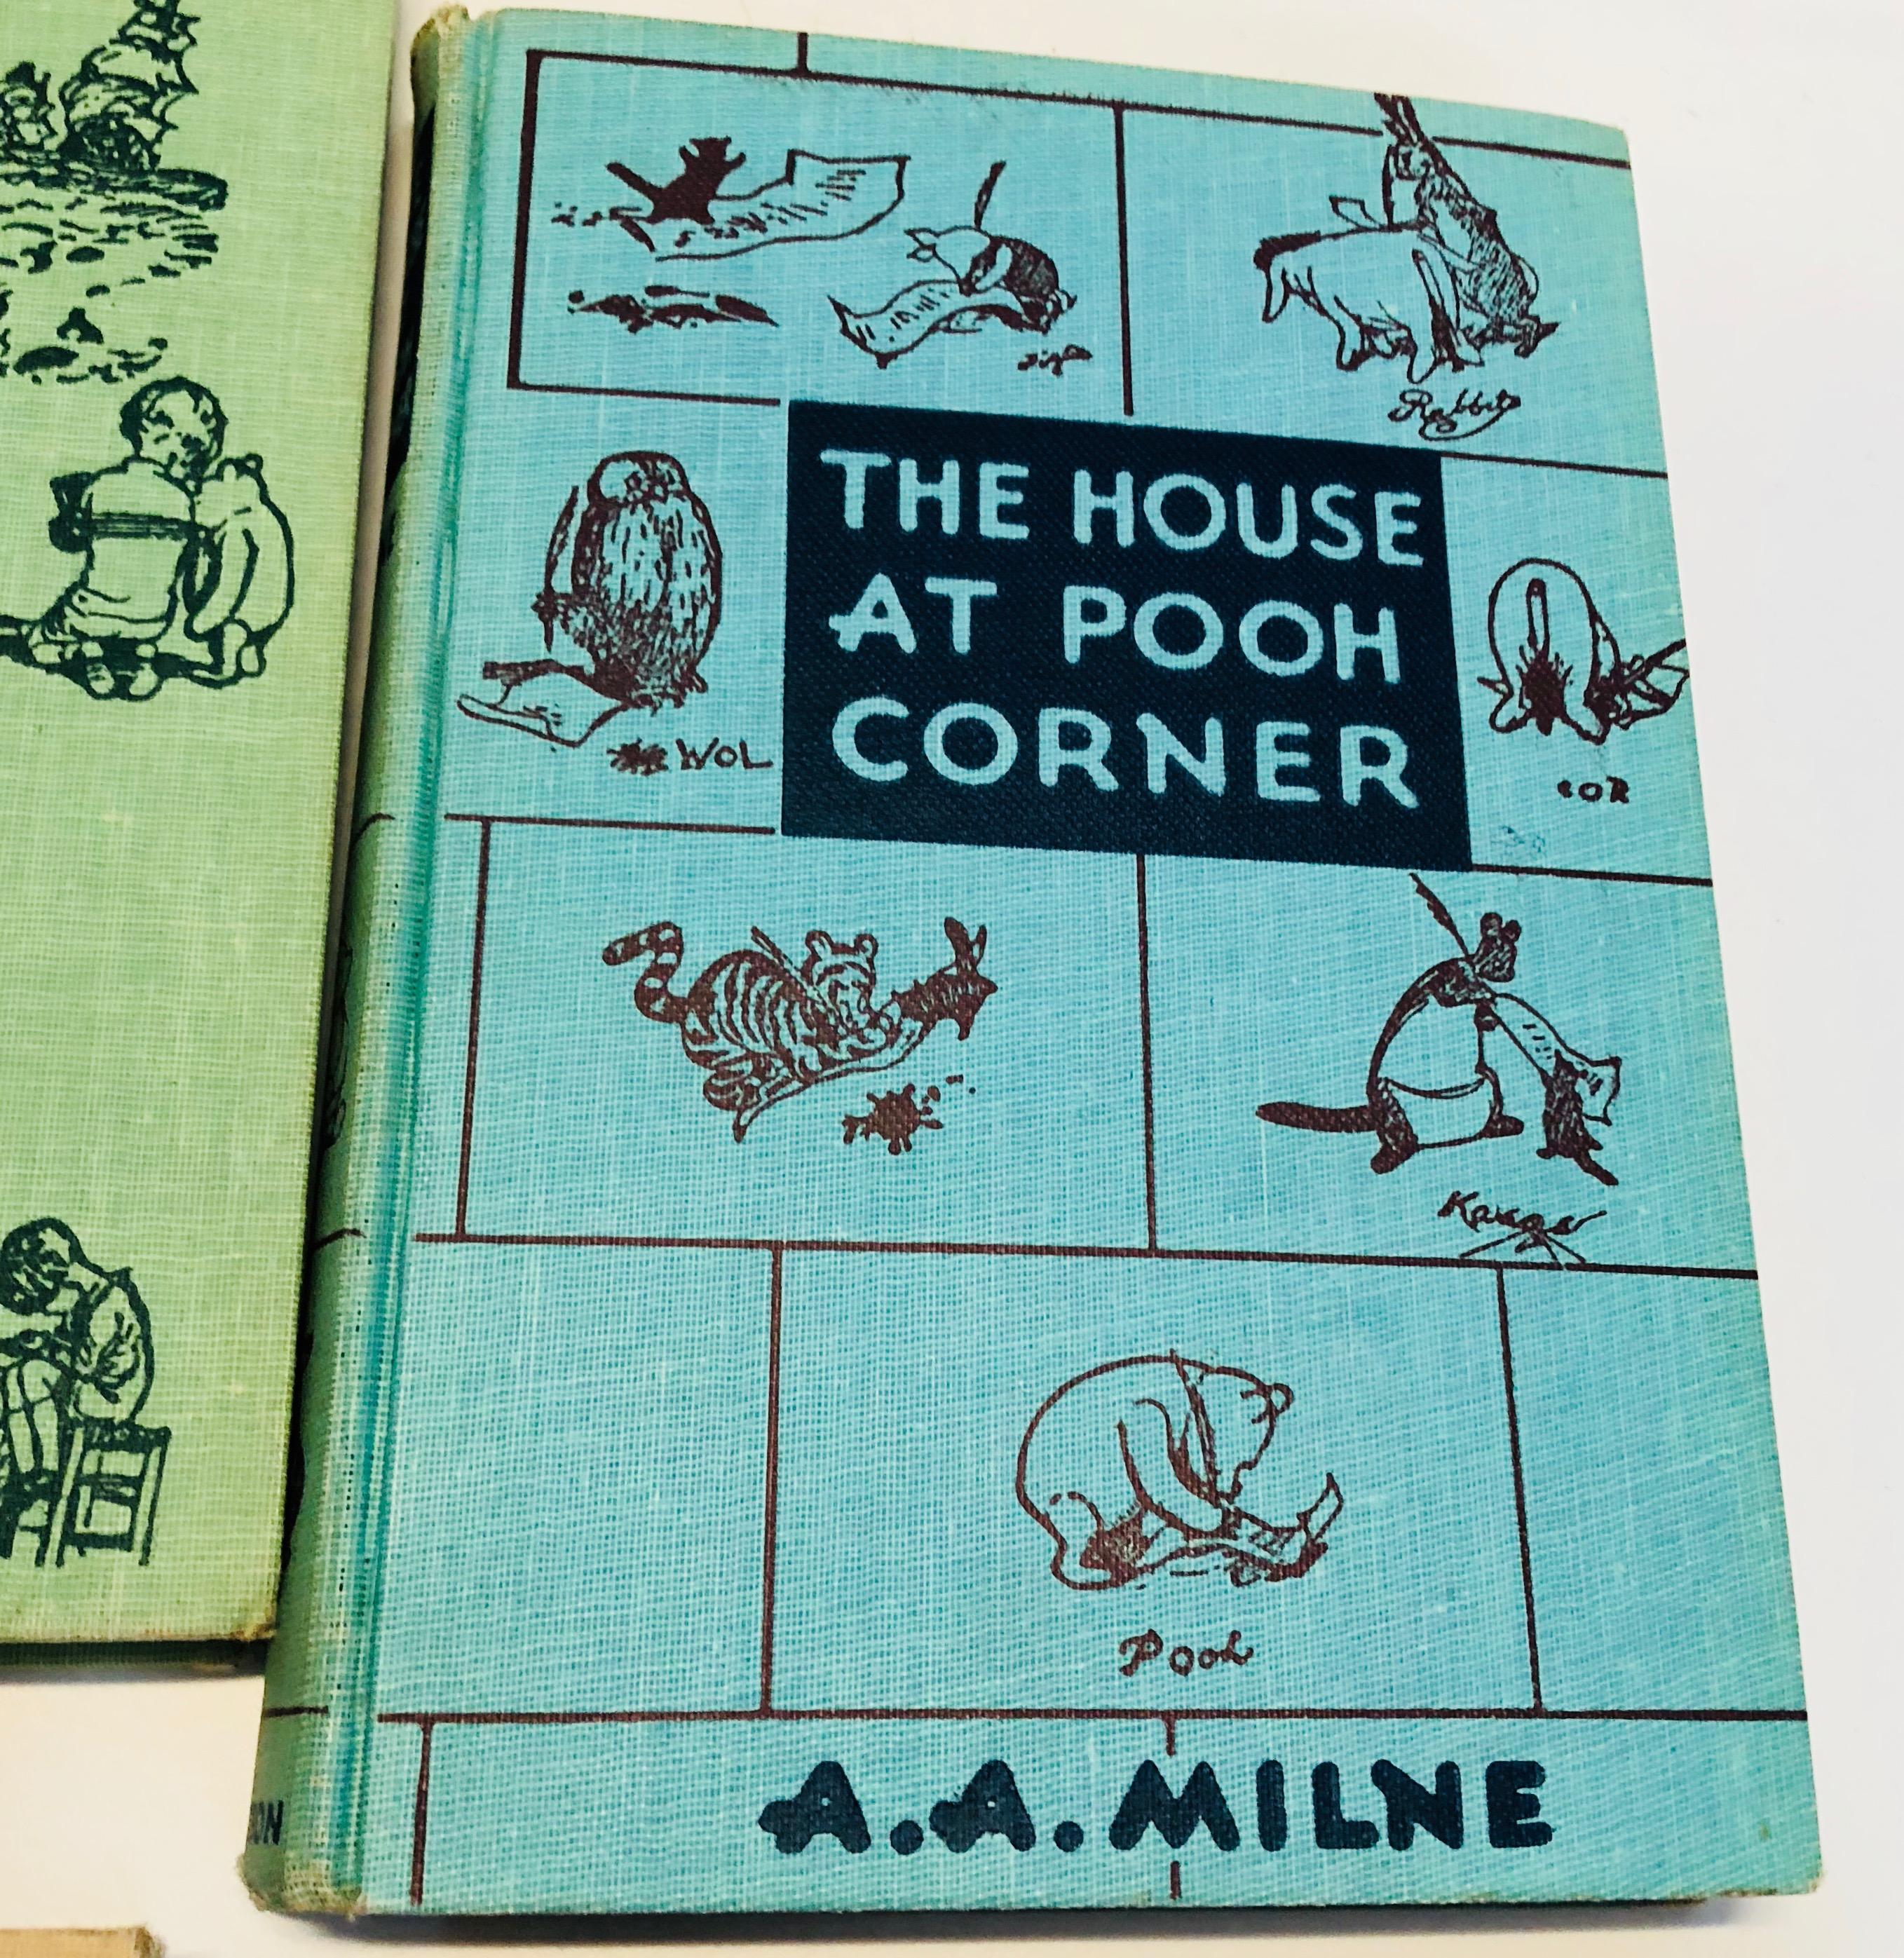 Collection of WINNIE THE POOH Books by A.A. Milne